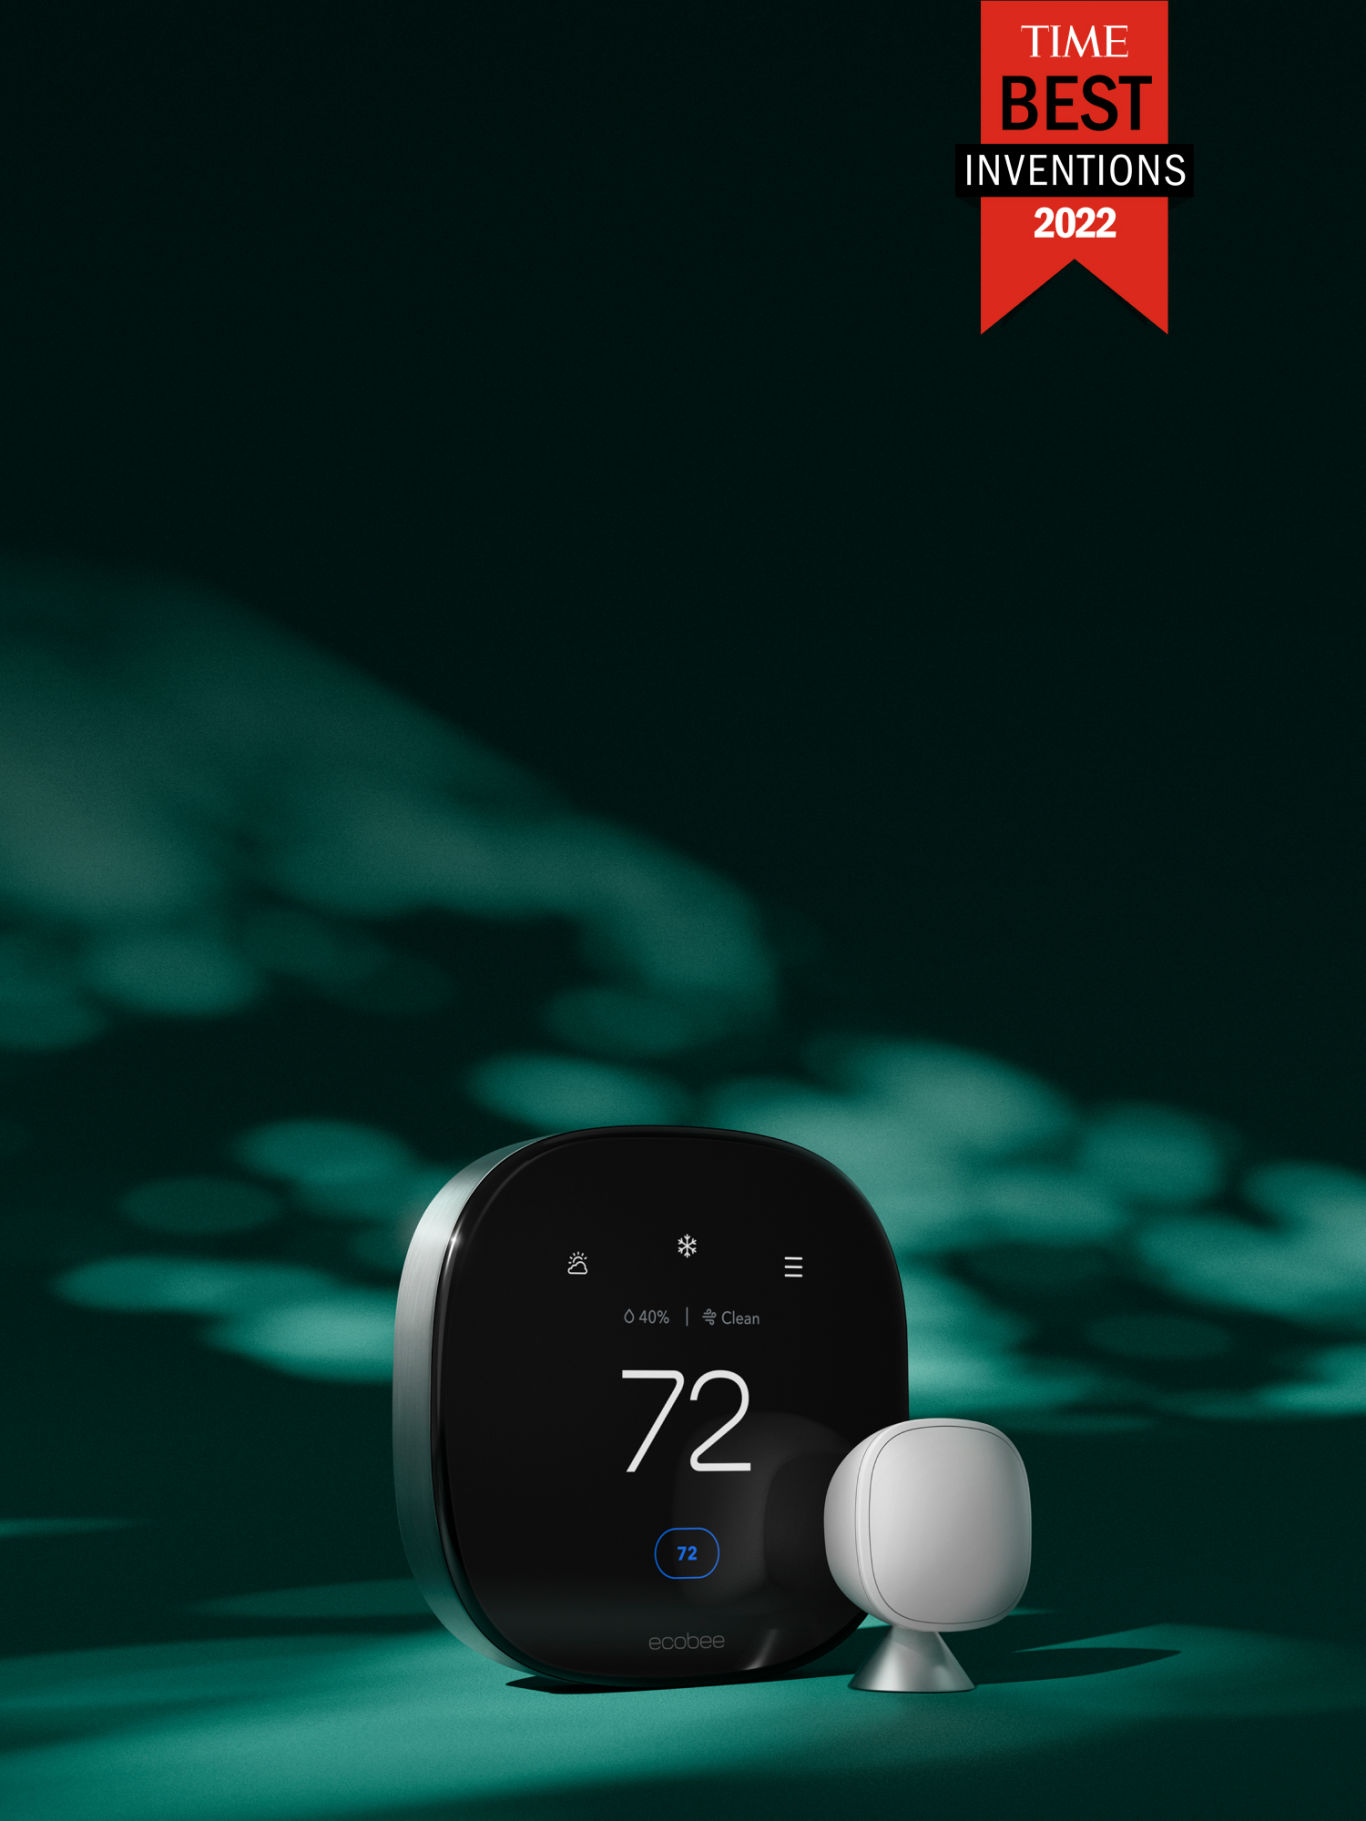 Smart Thermostat Premium sits on a green background with separate SmartSensor in front. A red banner reads “TIME BEST INVENTIONS 2022”. The thermostat displays 72 degrees, and a clean air reading.